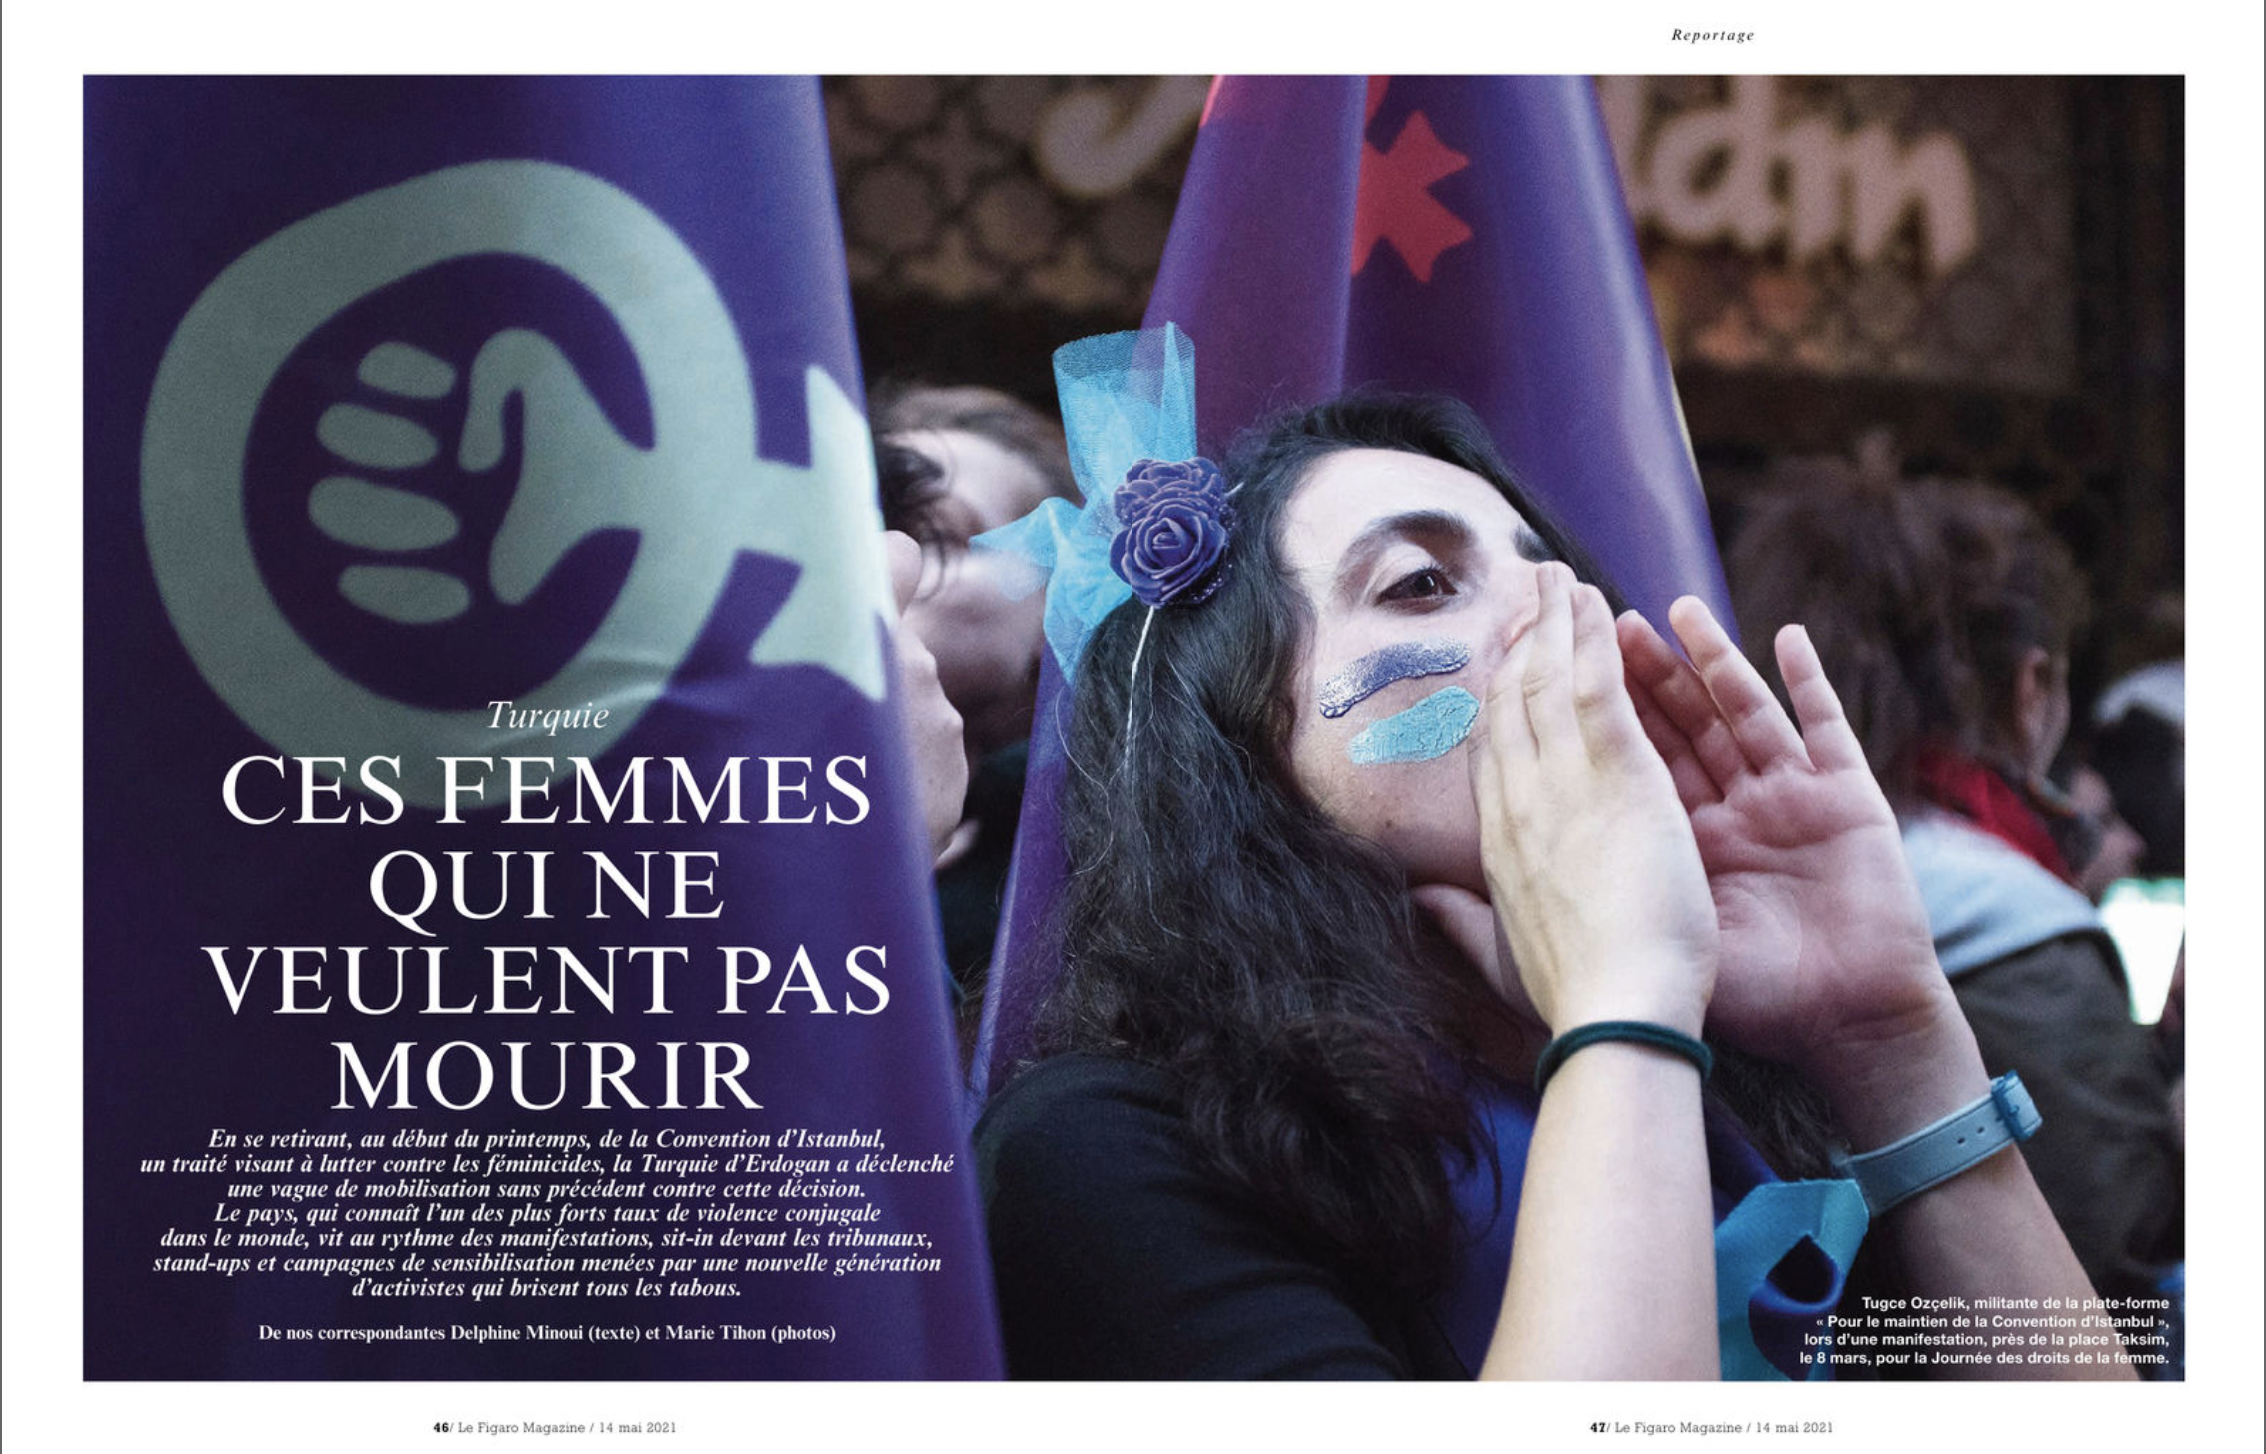 Image from Publications - Le Figaro Magazine - 8 pages